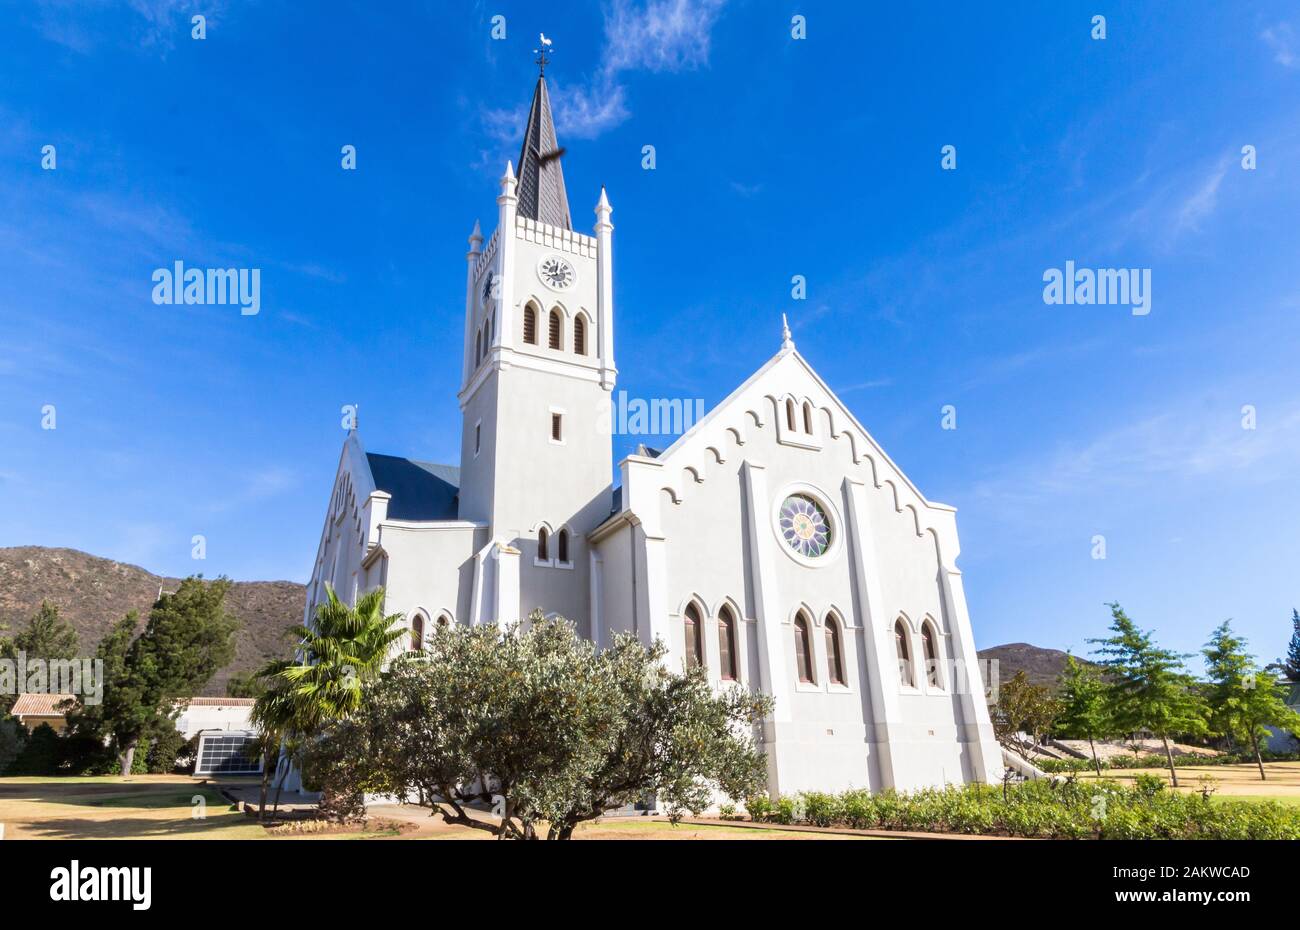 Barrydale Dutch Reformed Church in Barrydale South Africa on Route 62 Stock Photo